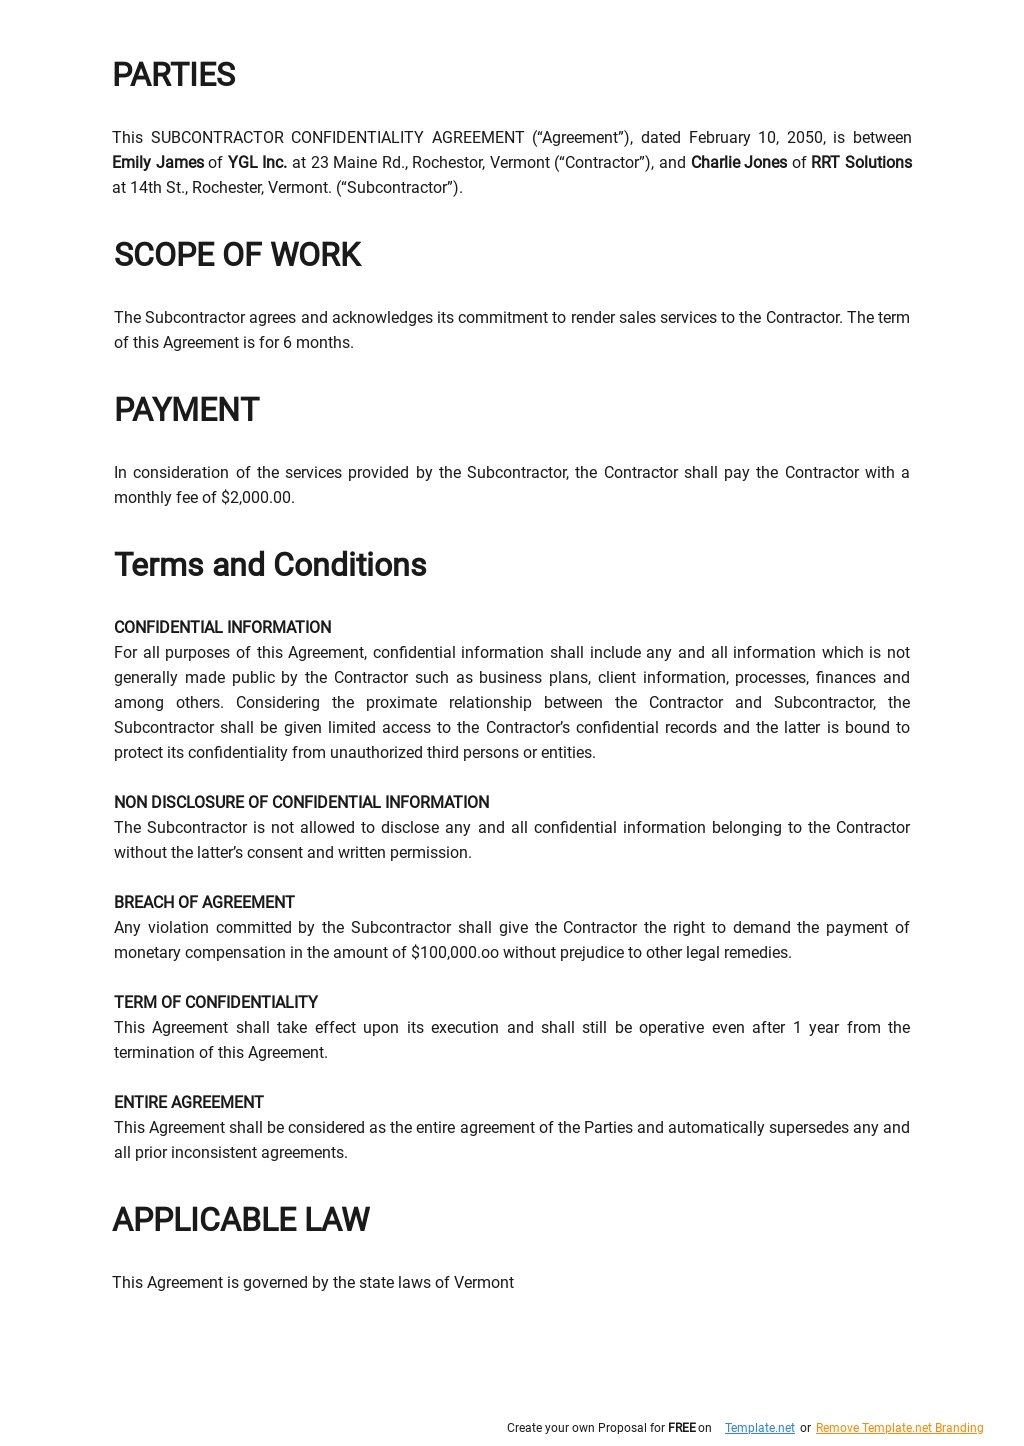 Subcontractor Confidentiality Agreement Template 1.jpe